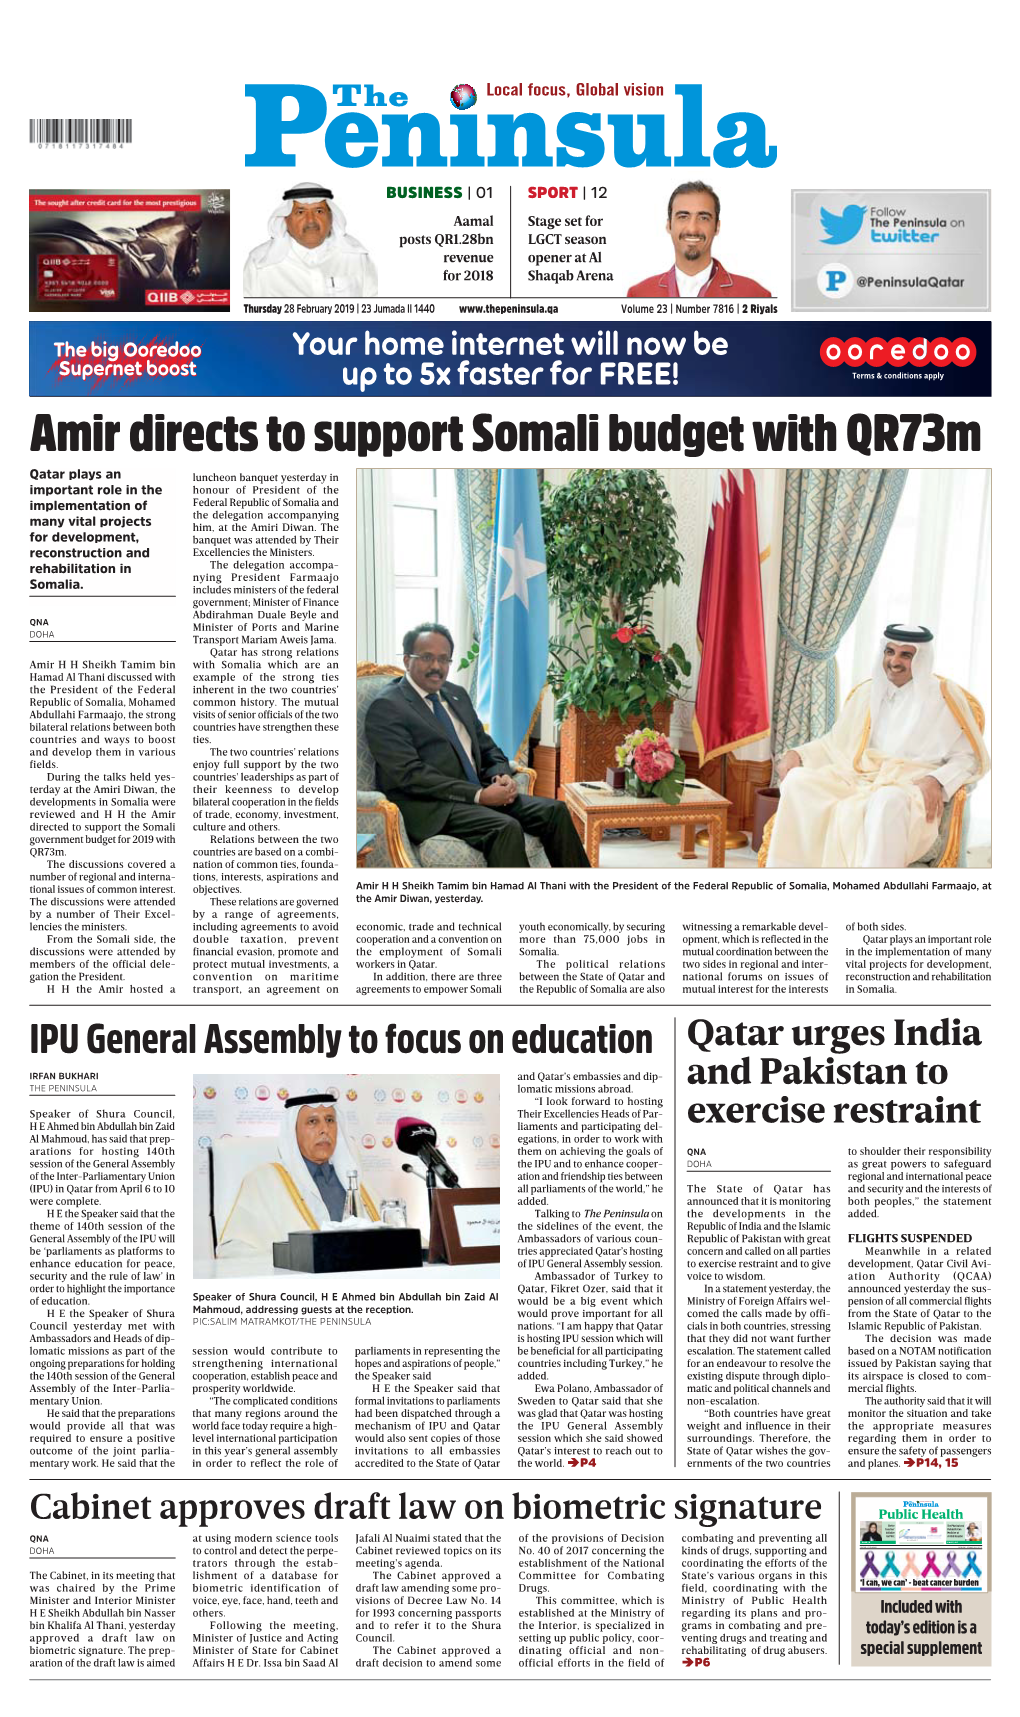 Amir Directs to Support Somali Budget with Qr73m